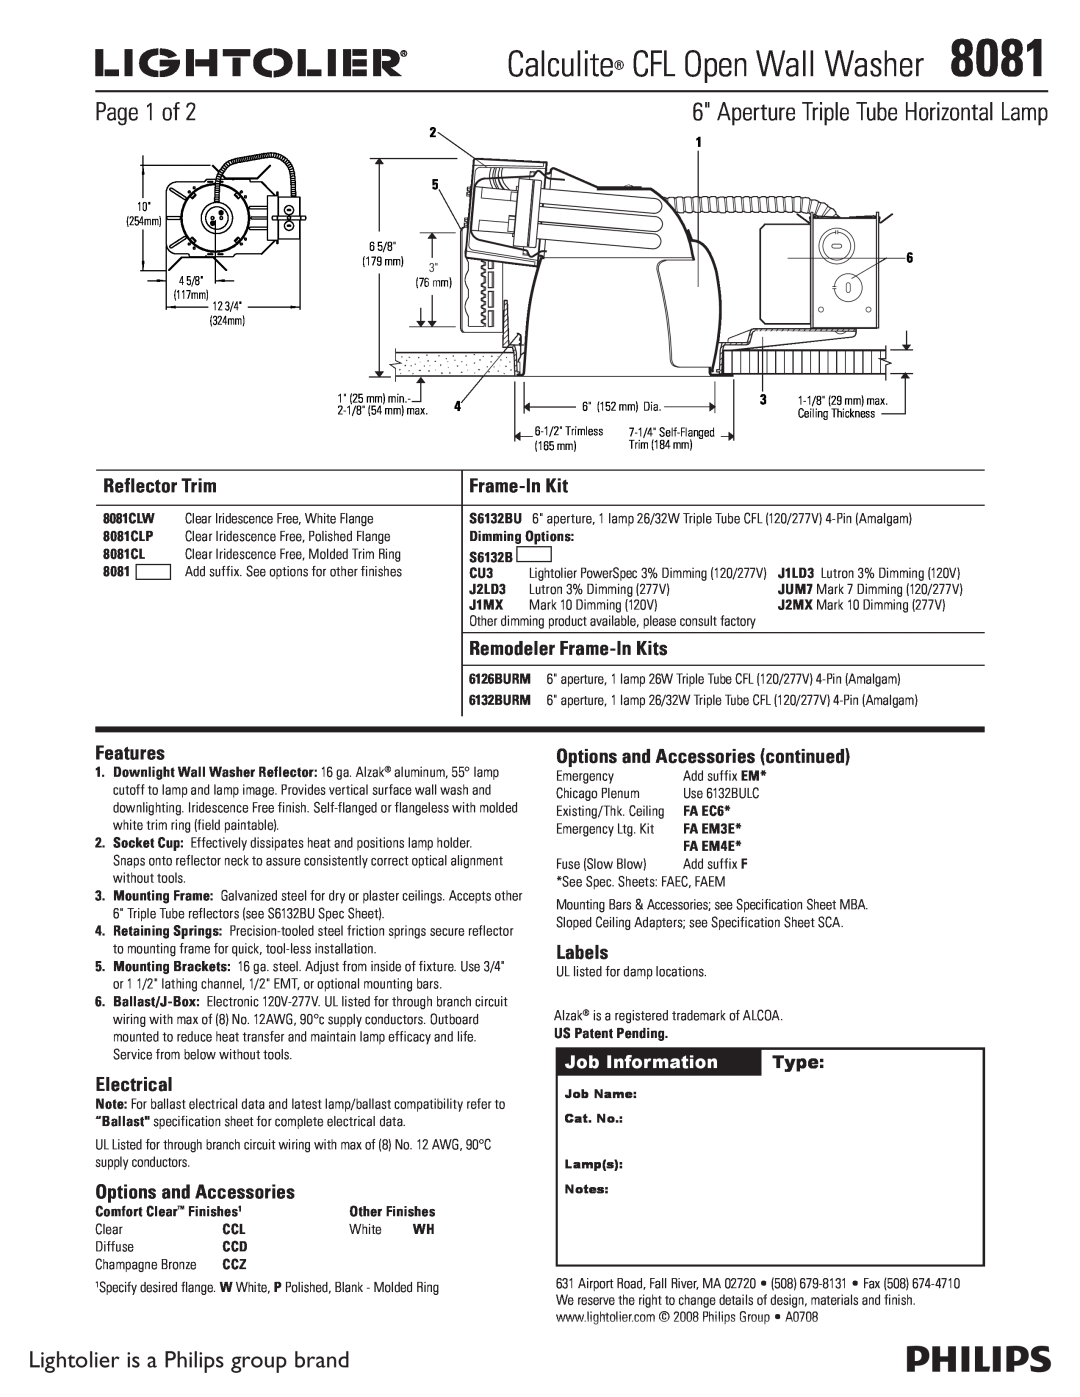 Lightolier 8081 specifications Page 1 of, Lightolier is a Philips group brand, Job Information, Type, Reflector Trim 